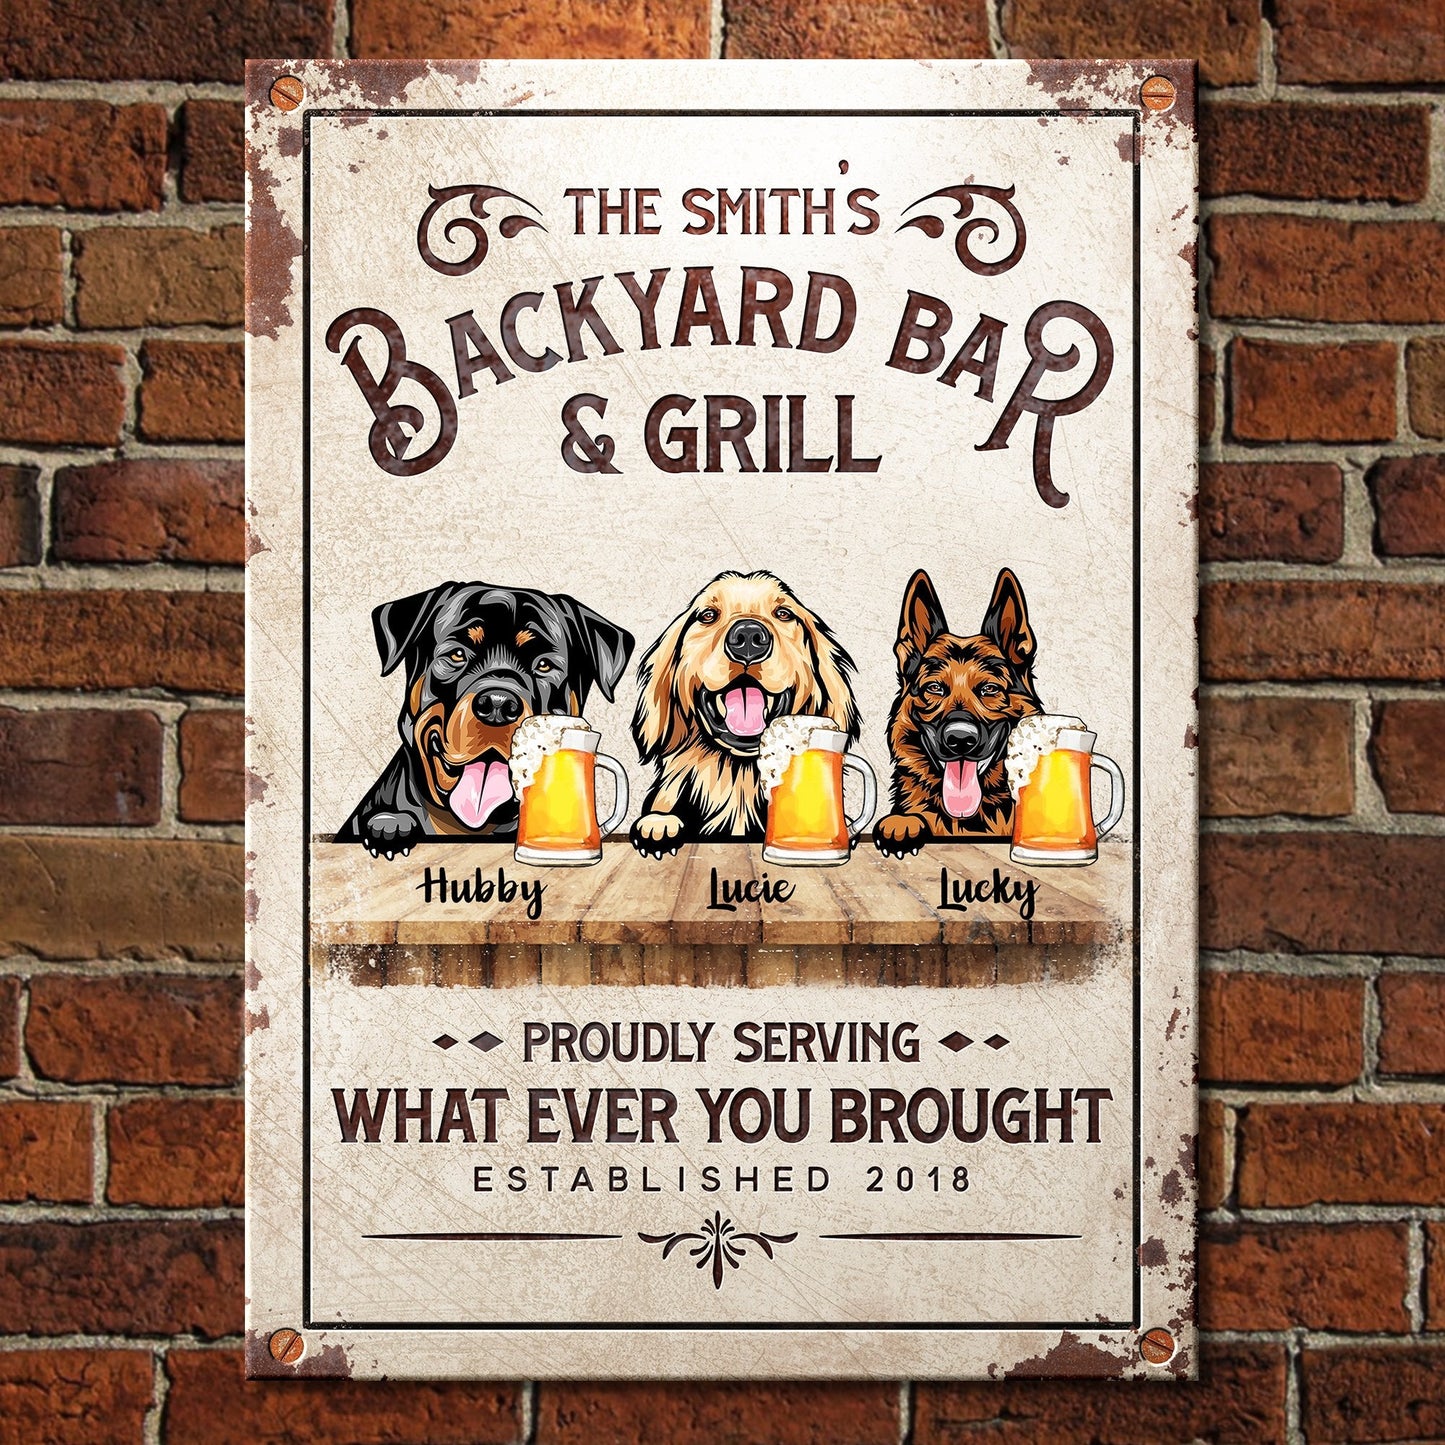 Backyard Bar & Grill - Funny Personalized Dog Metal Sign